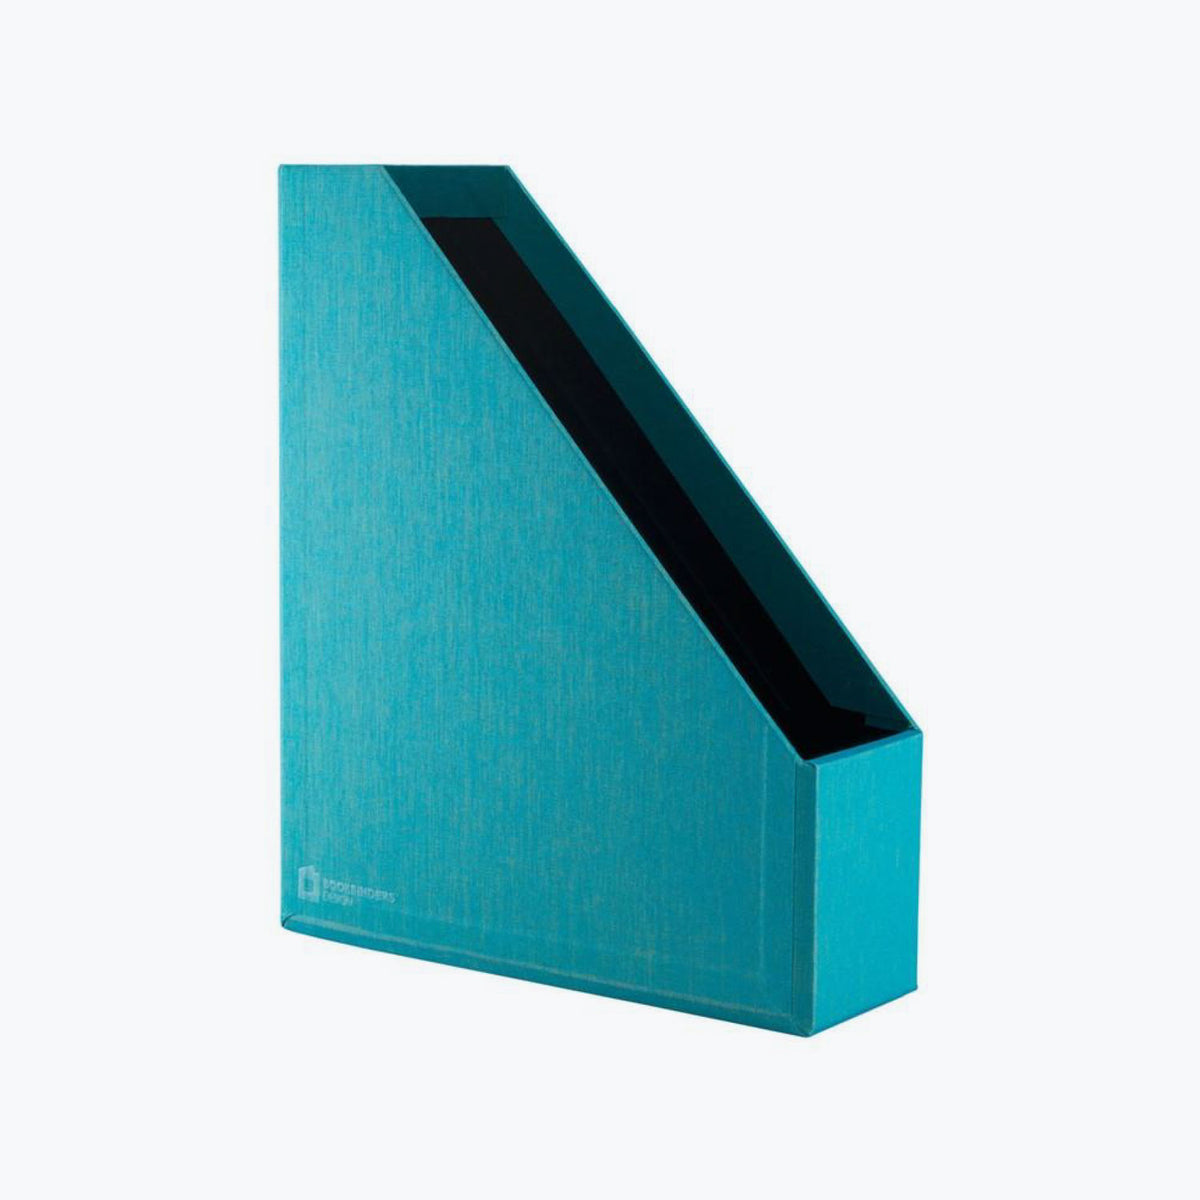 Bookbinders Design - Magazine File - A4 - Turquoise <Outgoing>